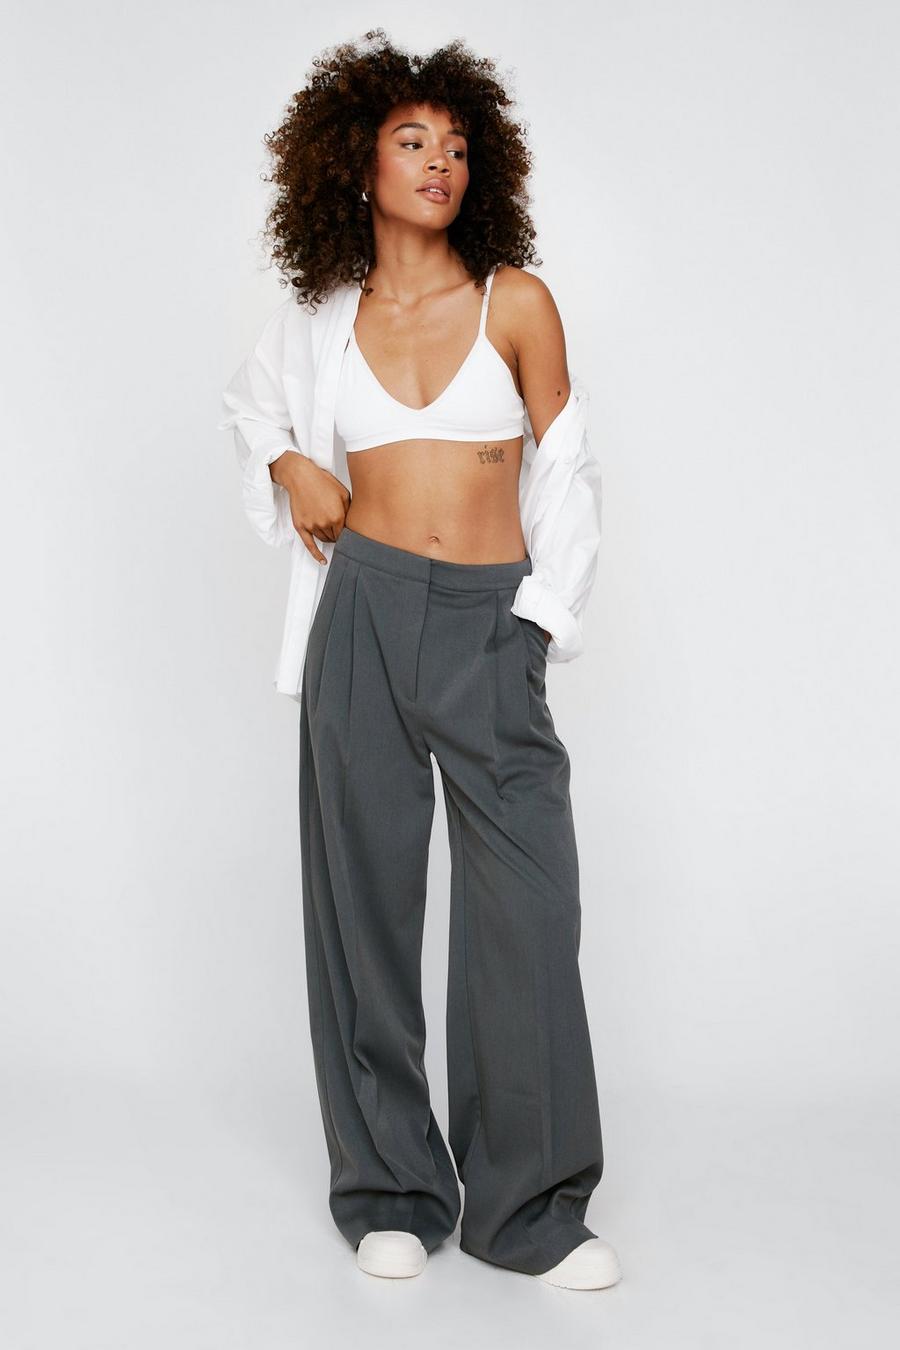 Pleat Front Tailored Trousers